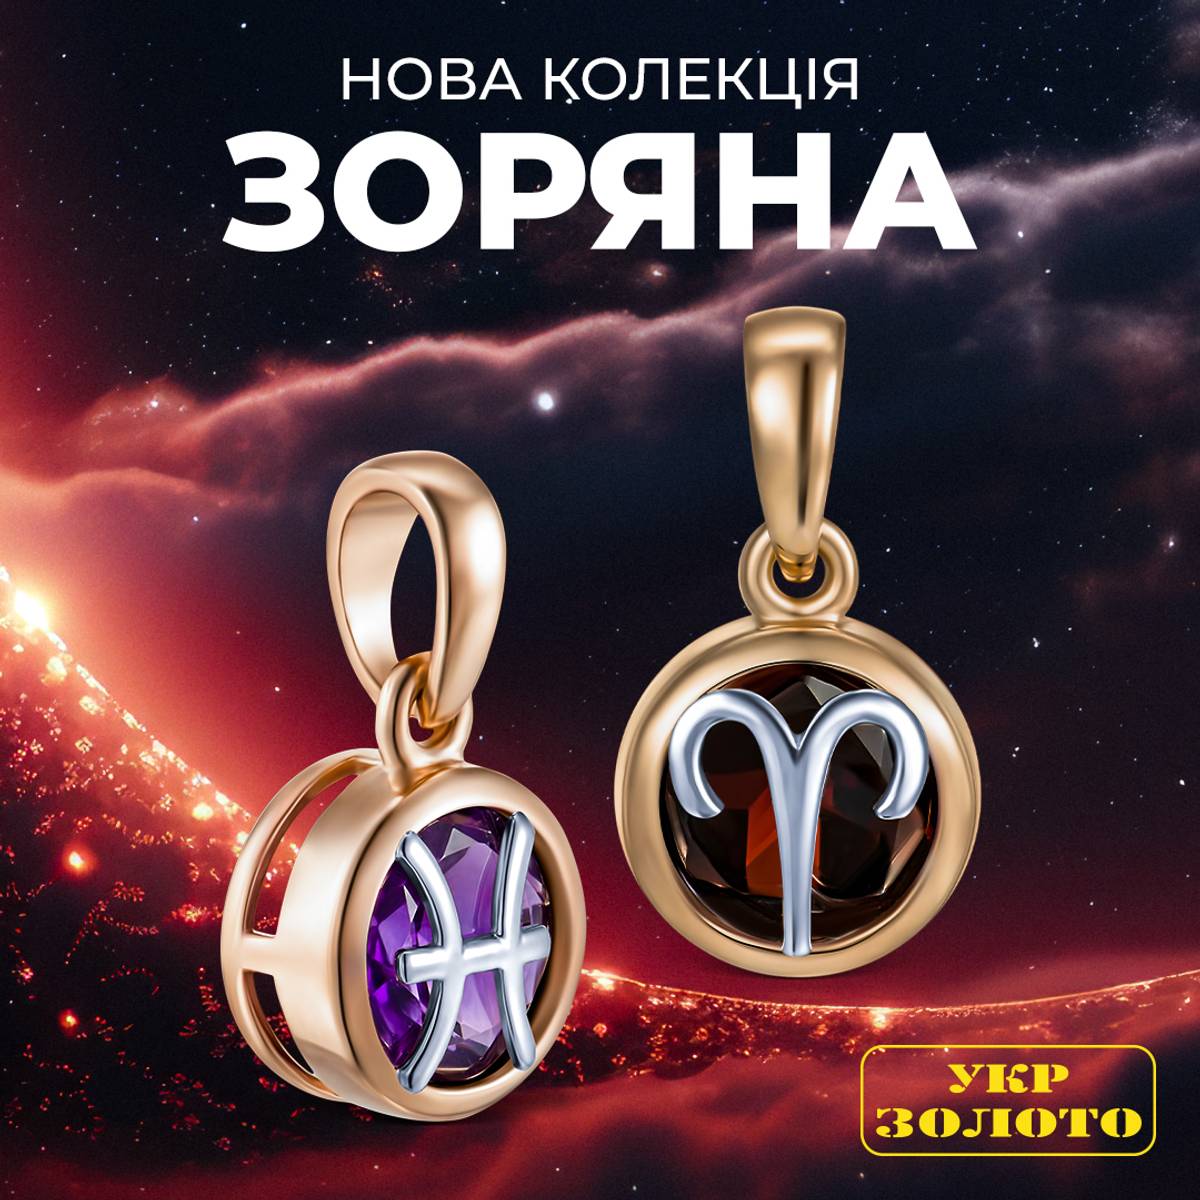 Look for your zodiac sign in Ukrzoloto stores!